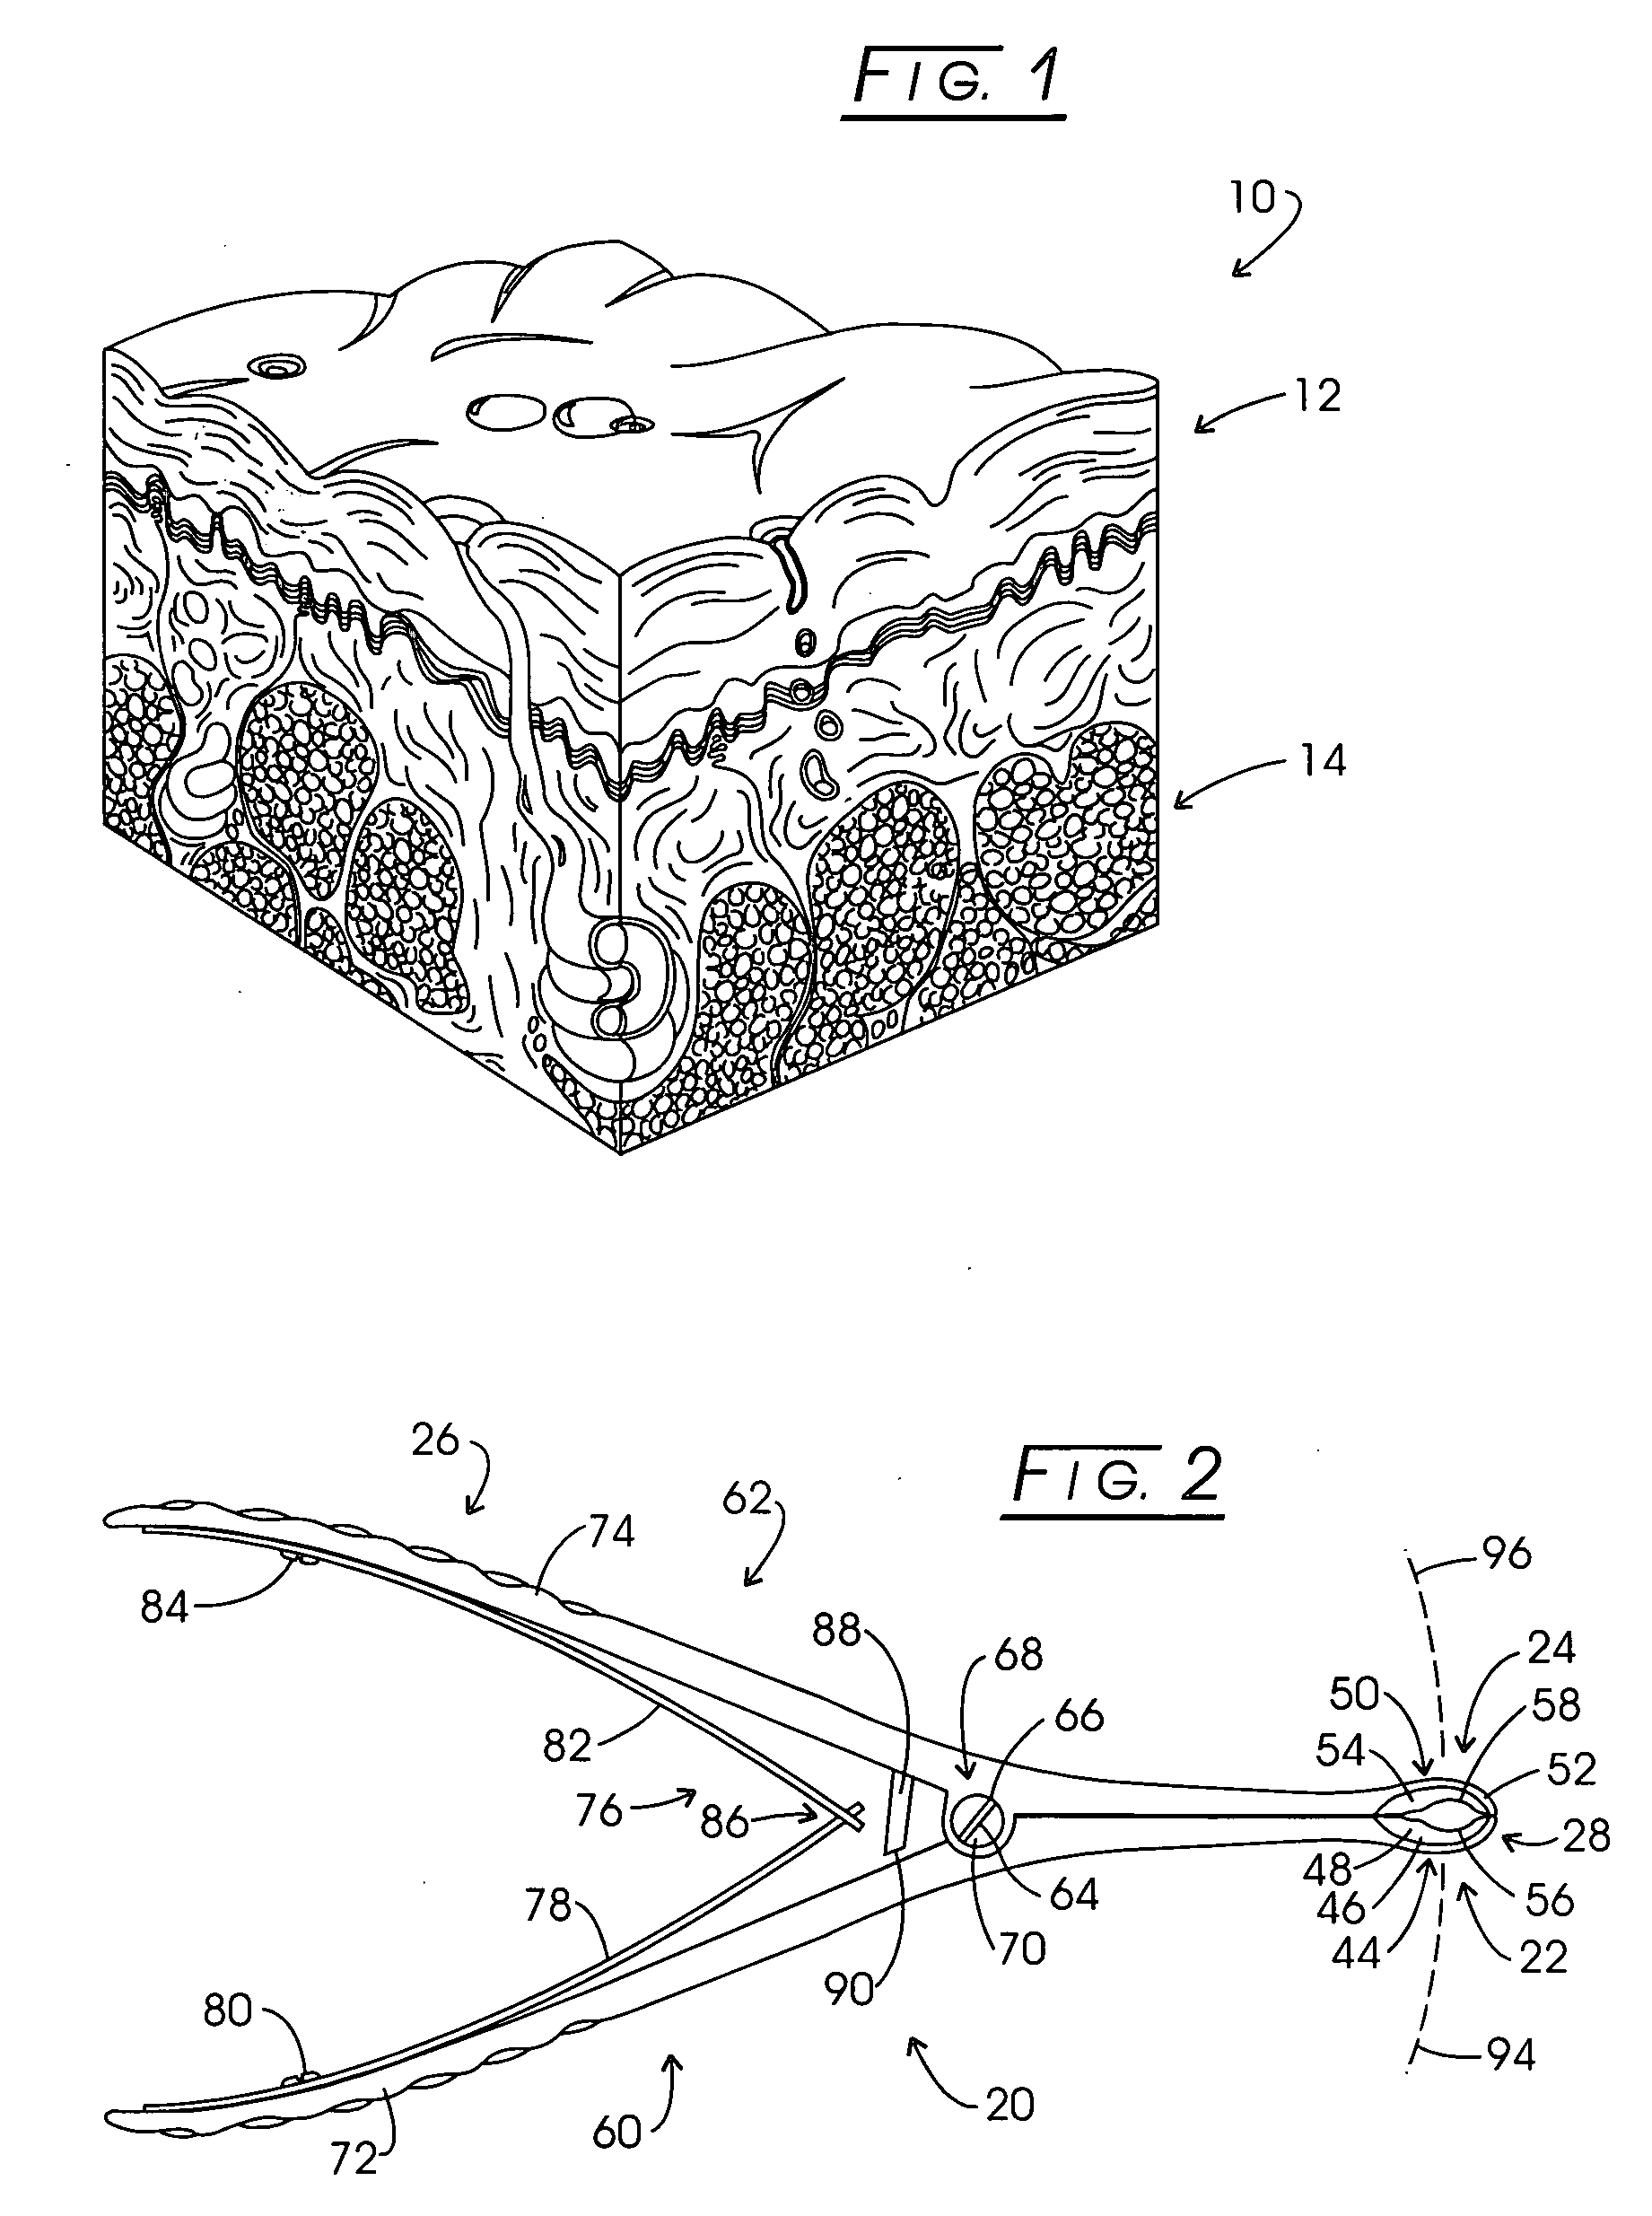 Method and apparatus for positioning a tissue recovery instrument in confronting adjacency with a target tissue volume